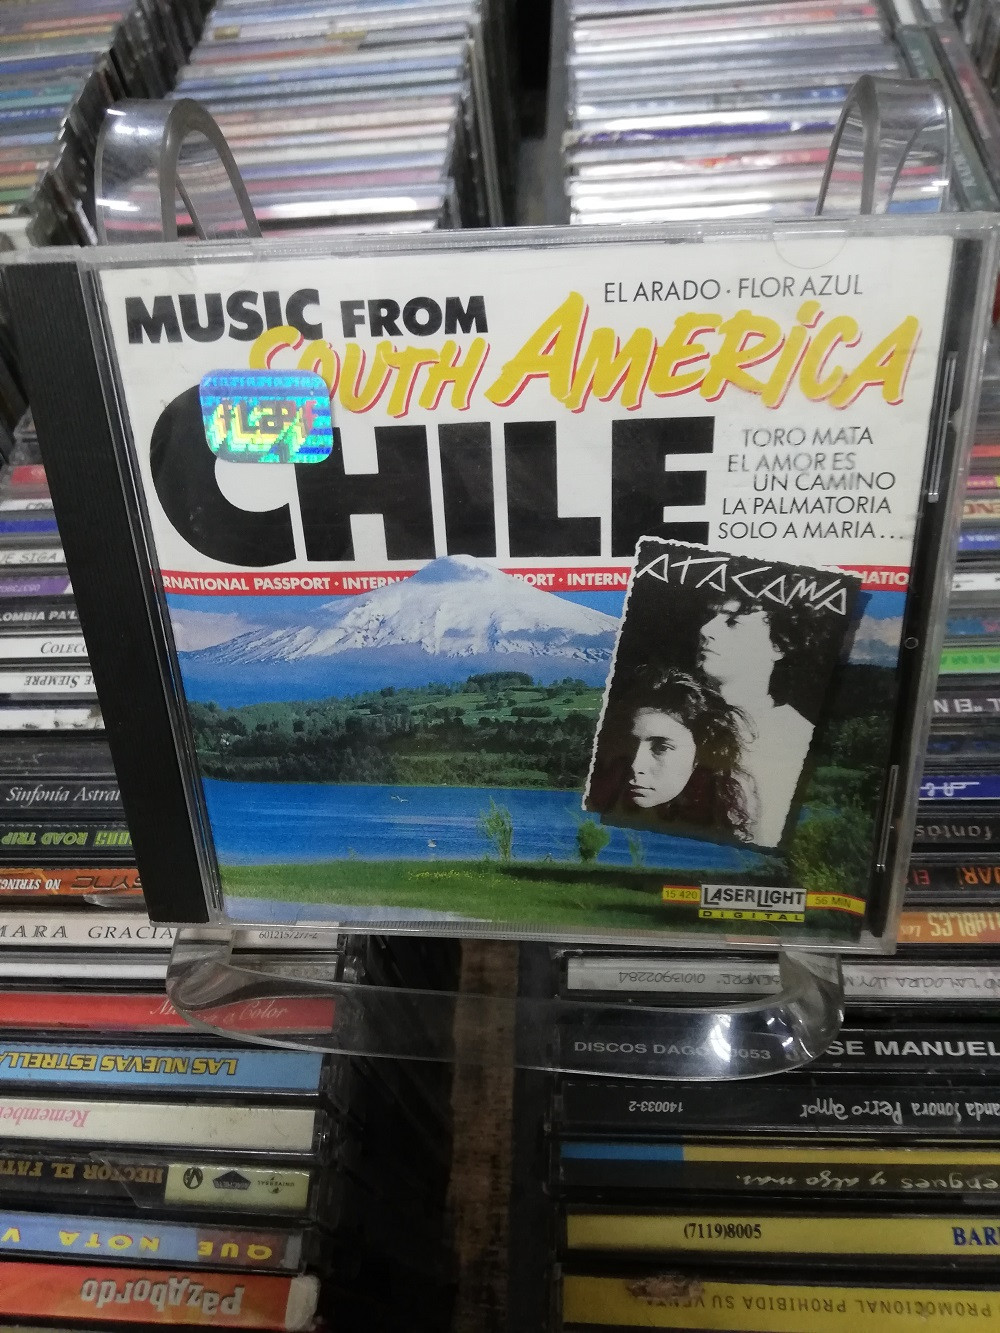 Imagen CD MUSIC FROM SOUTH AMERICA - CHILE